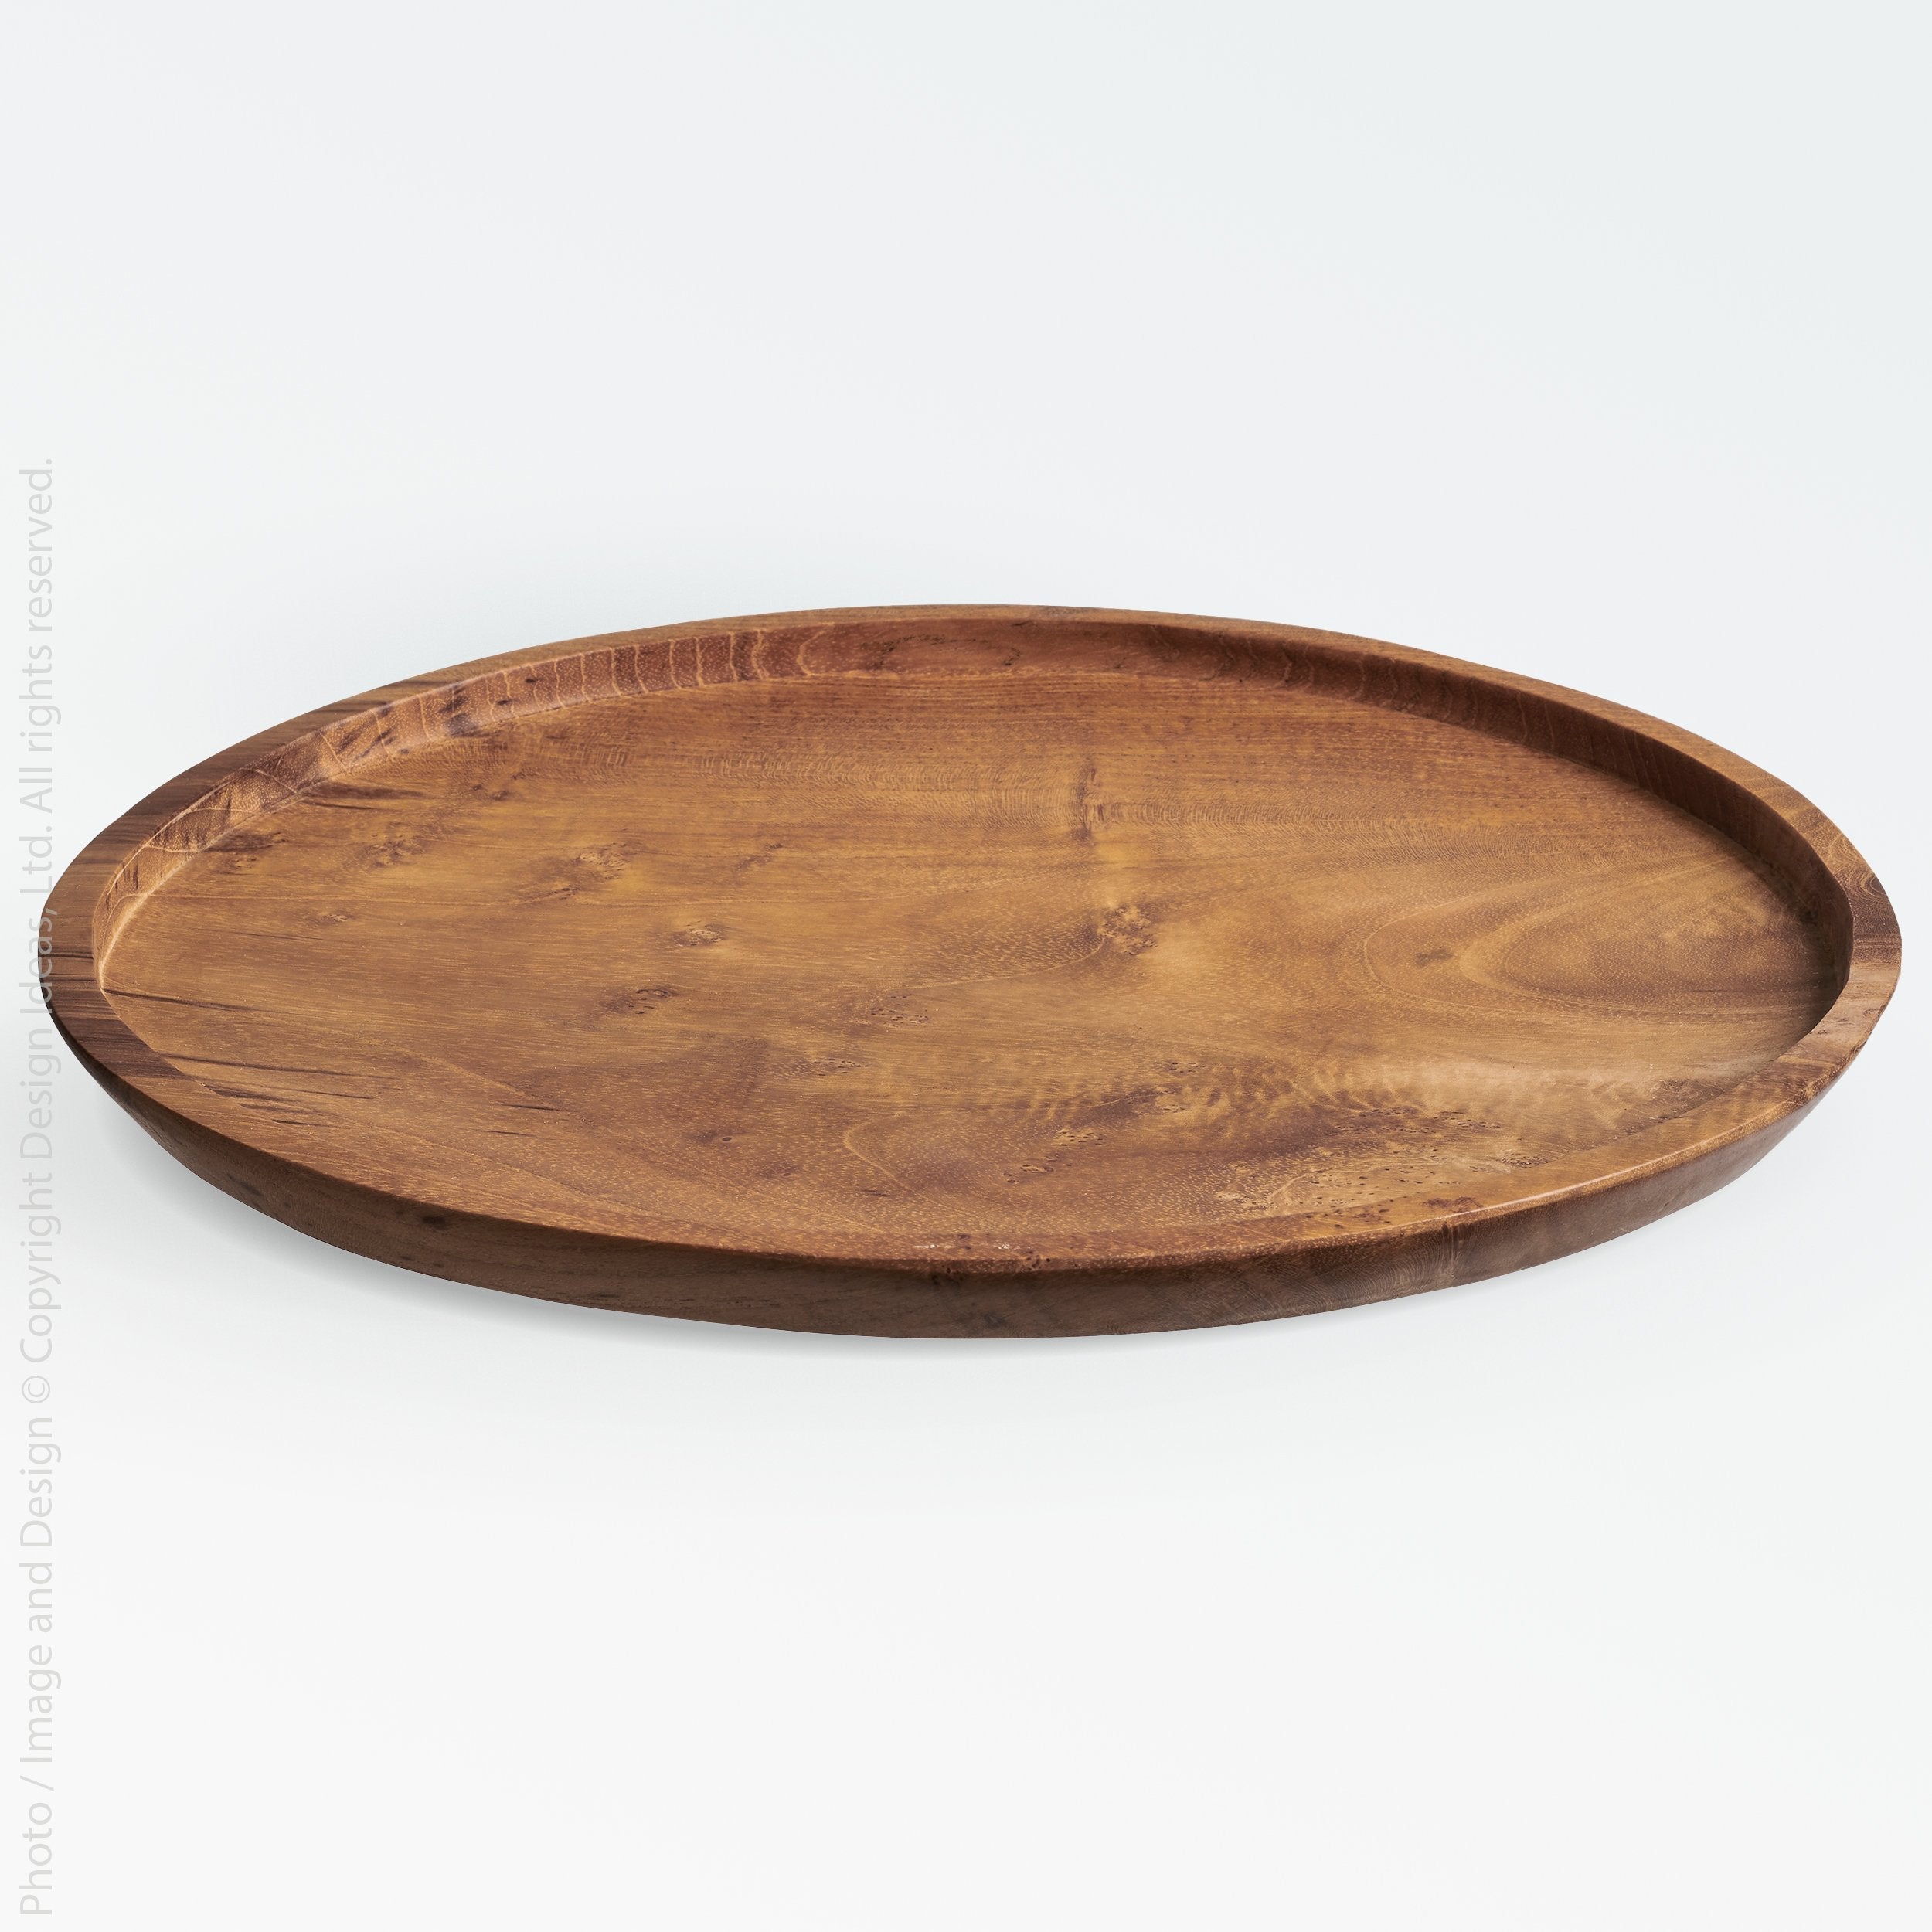 Chiku Teak Tray (Large) - Black Color | Image 1 | From the Chiku Collection | Skillfully handmade with natural teak for long lasting use | This tray is sustainably sourced | Available in natural color | texxture home